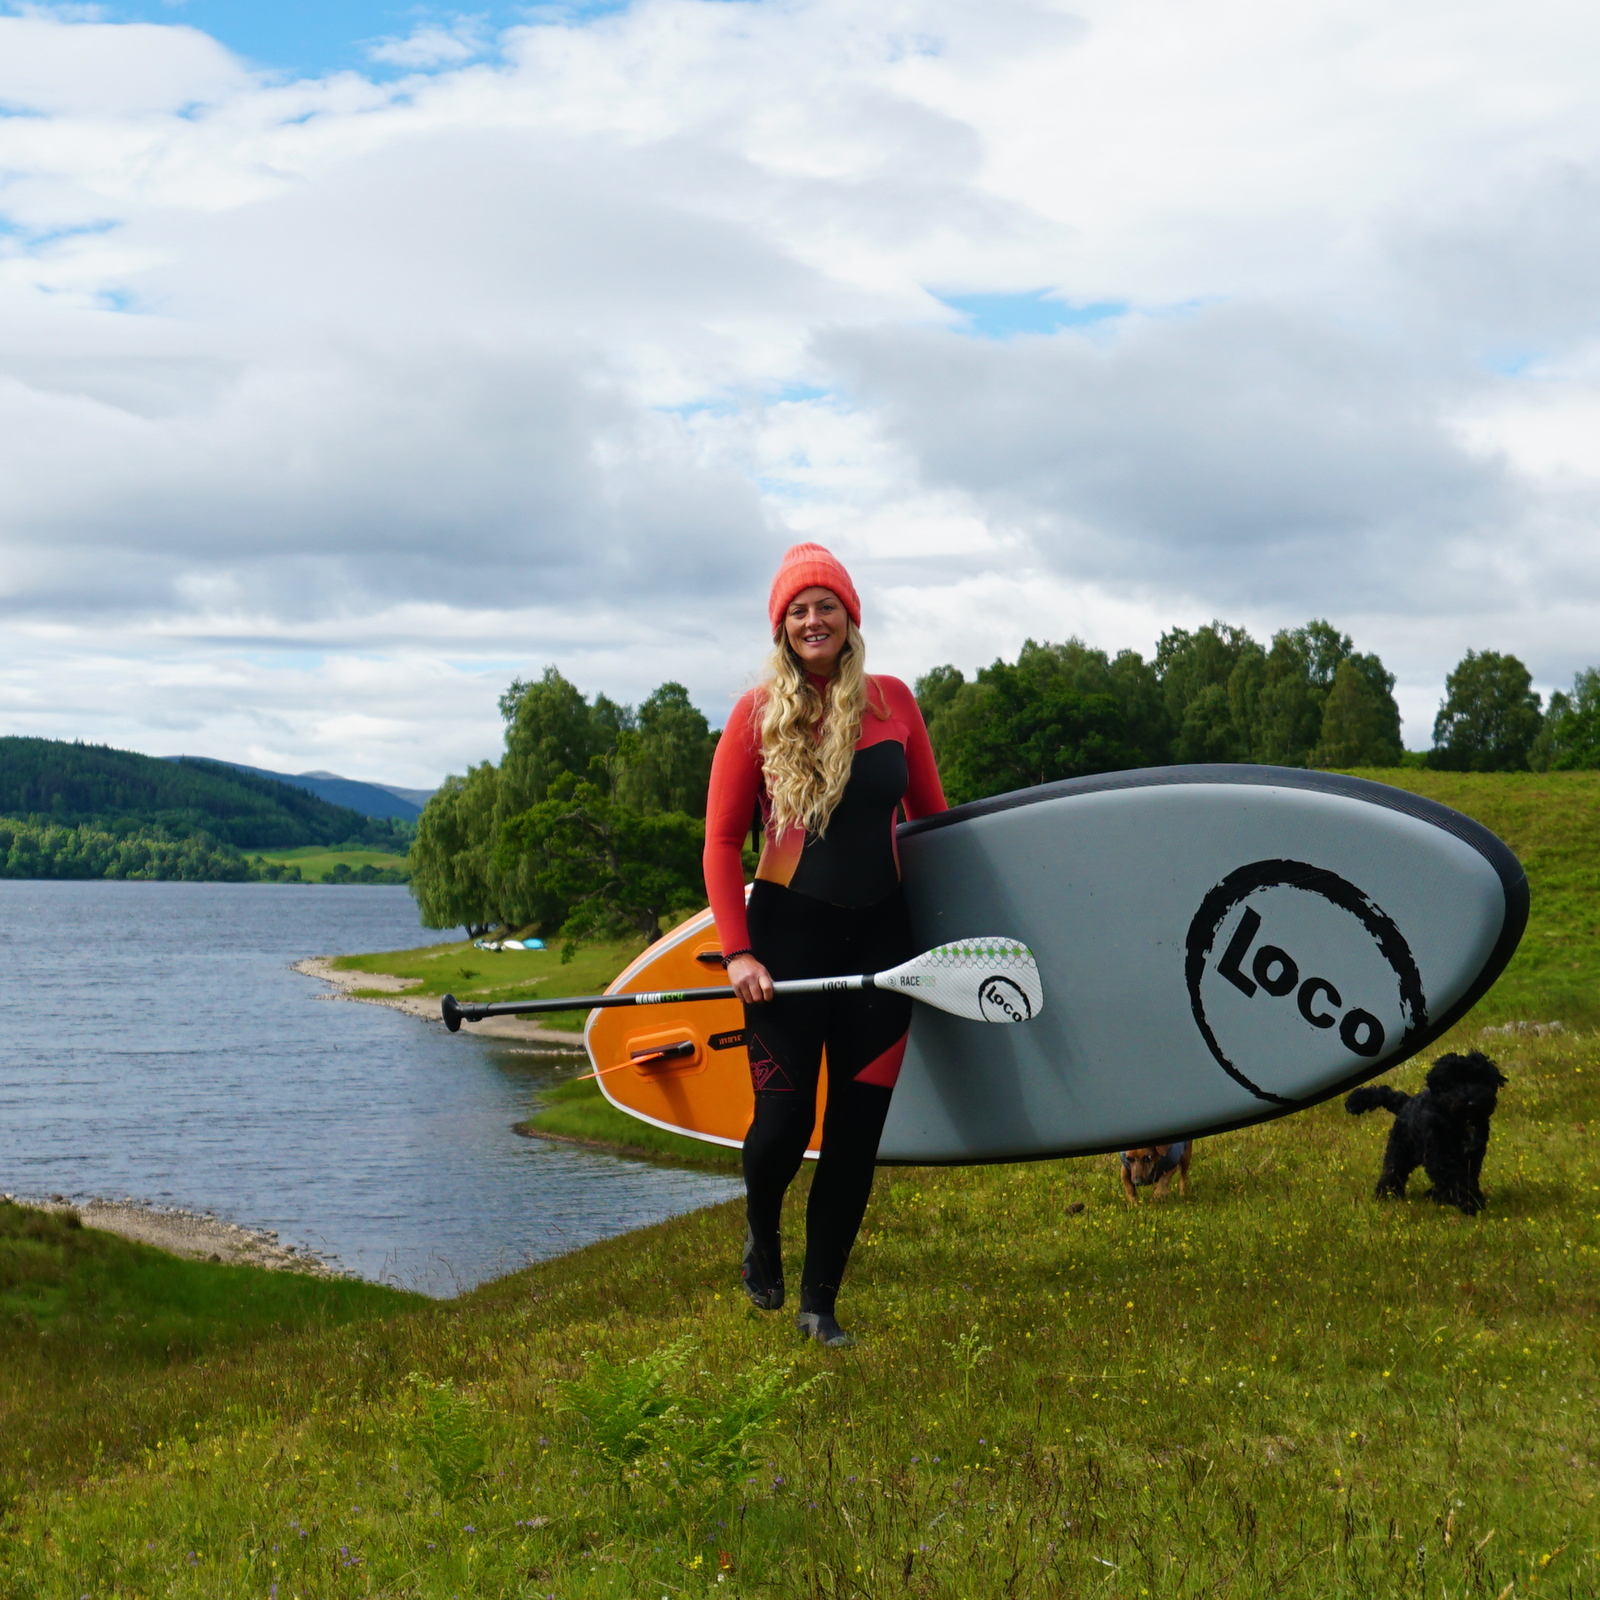 Kate Chandler about to SUP in Scotland